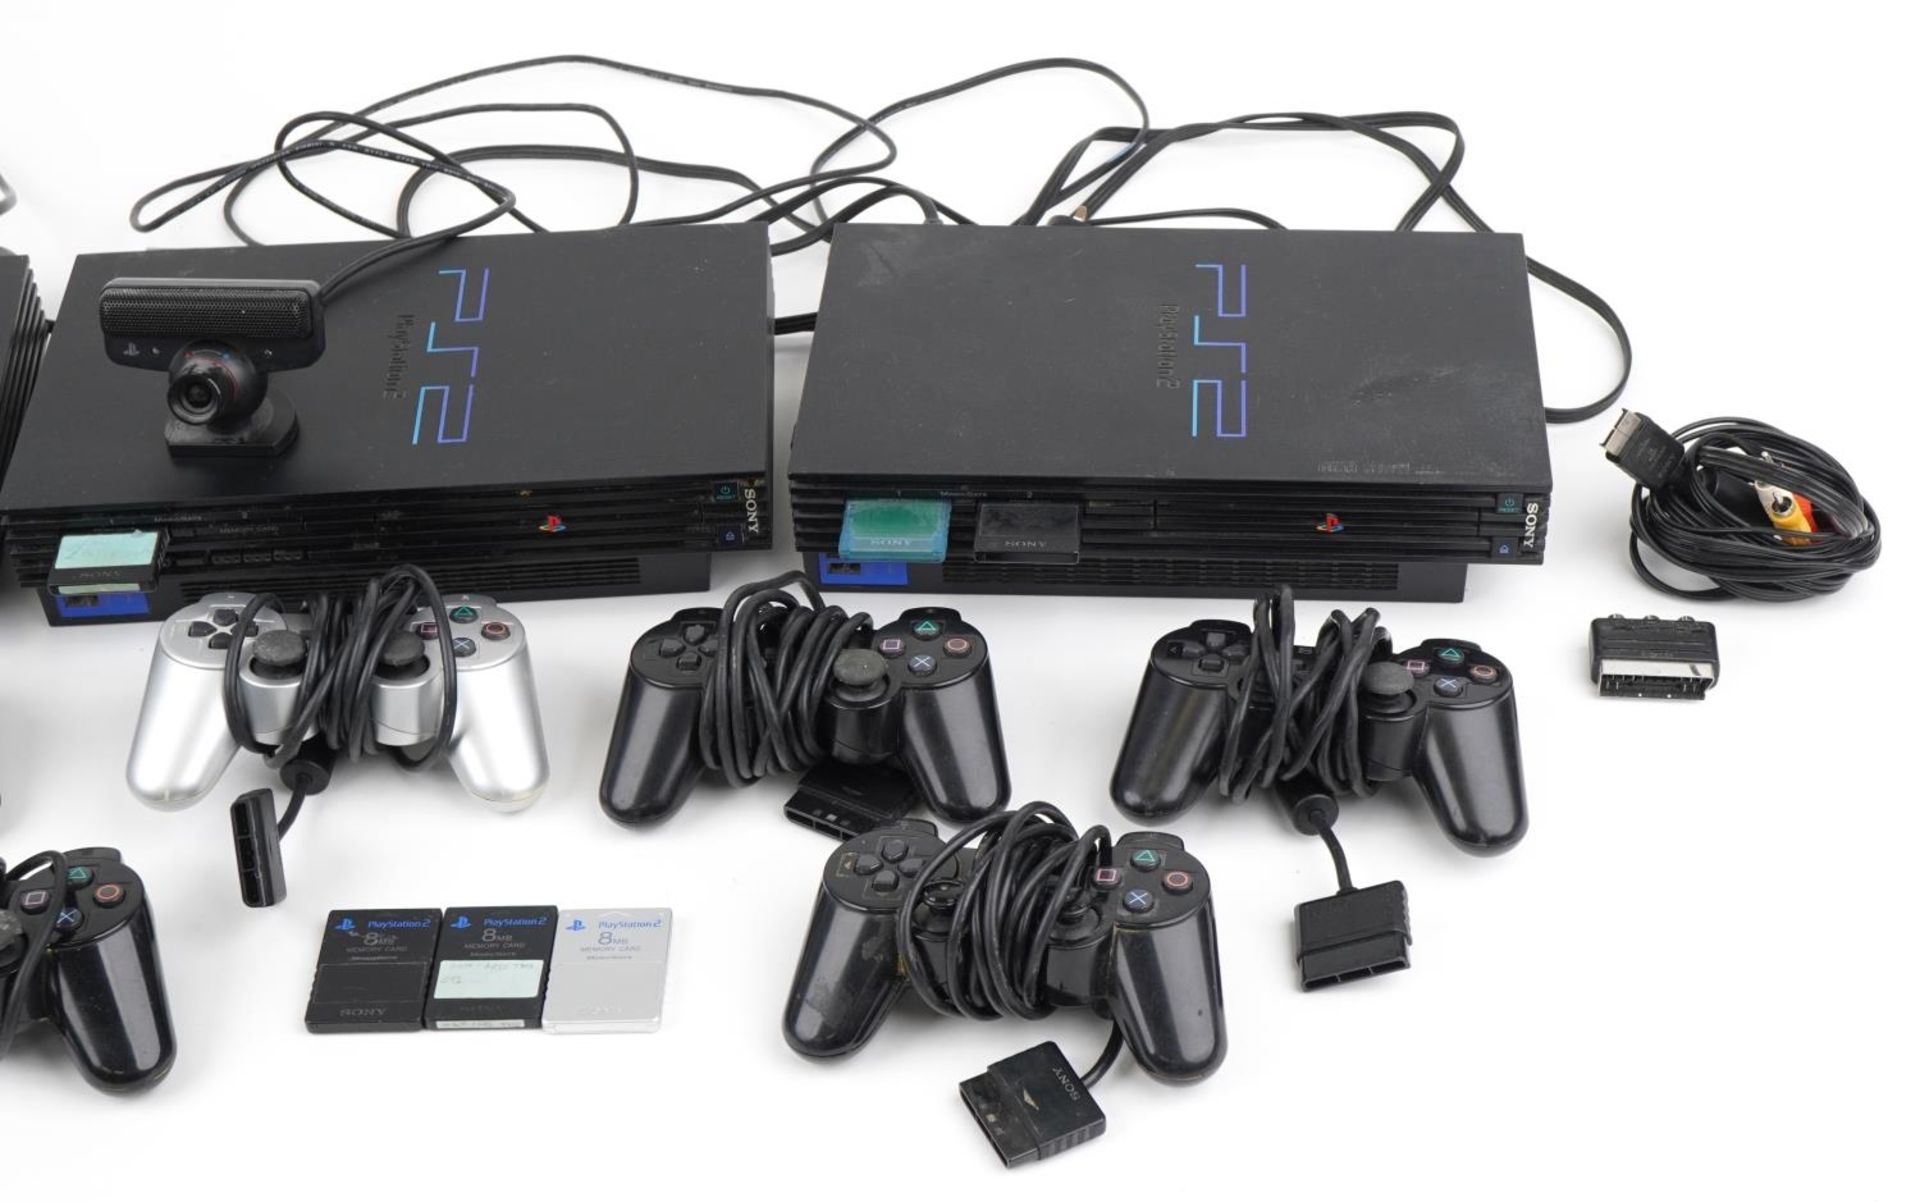 Three PlayStation 2 games consoles with controllers and accessories : For further information on - Bild 3 aus 3